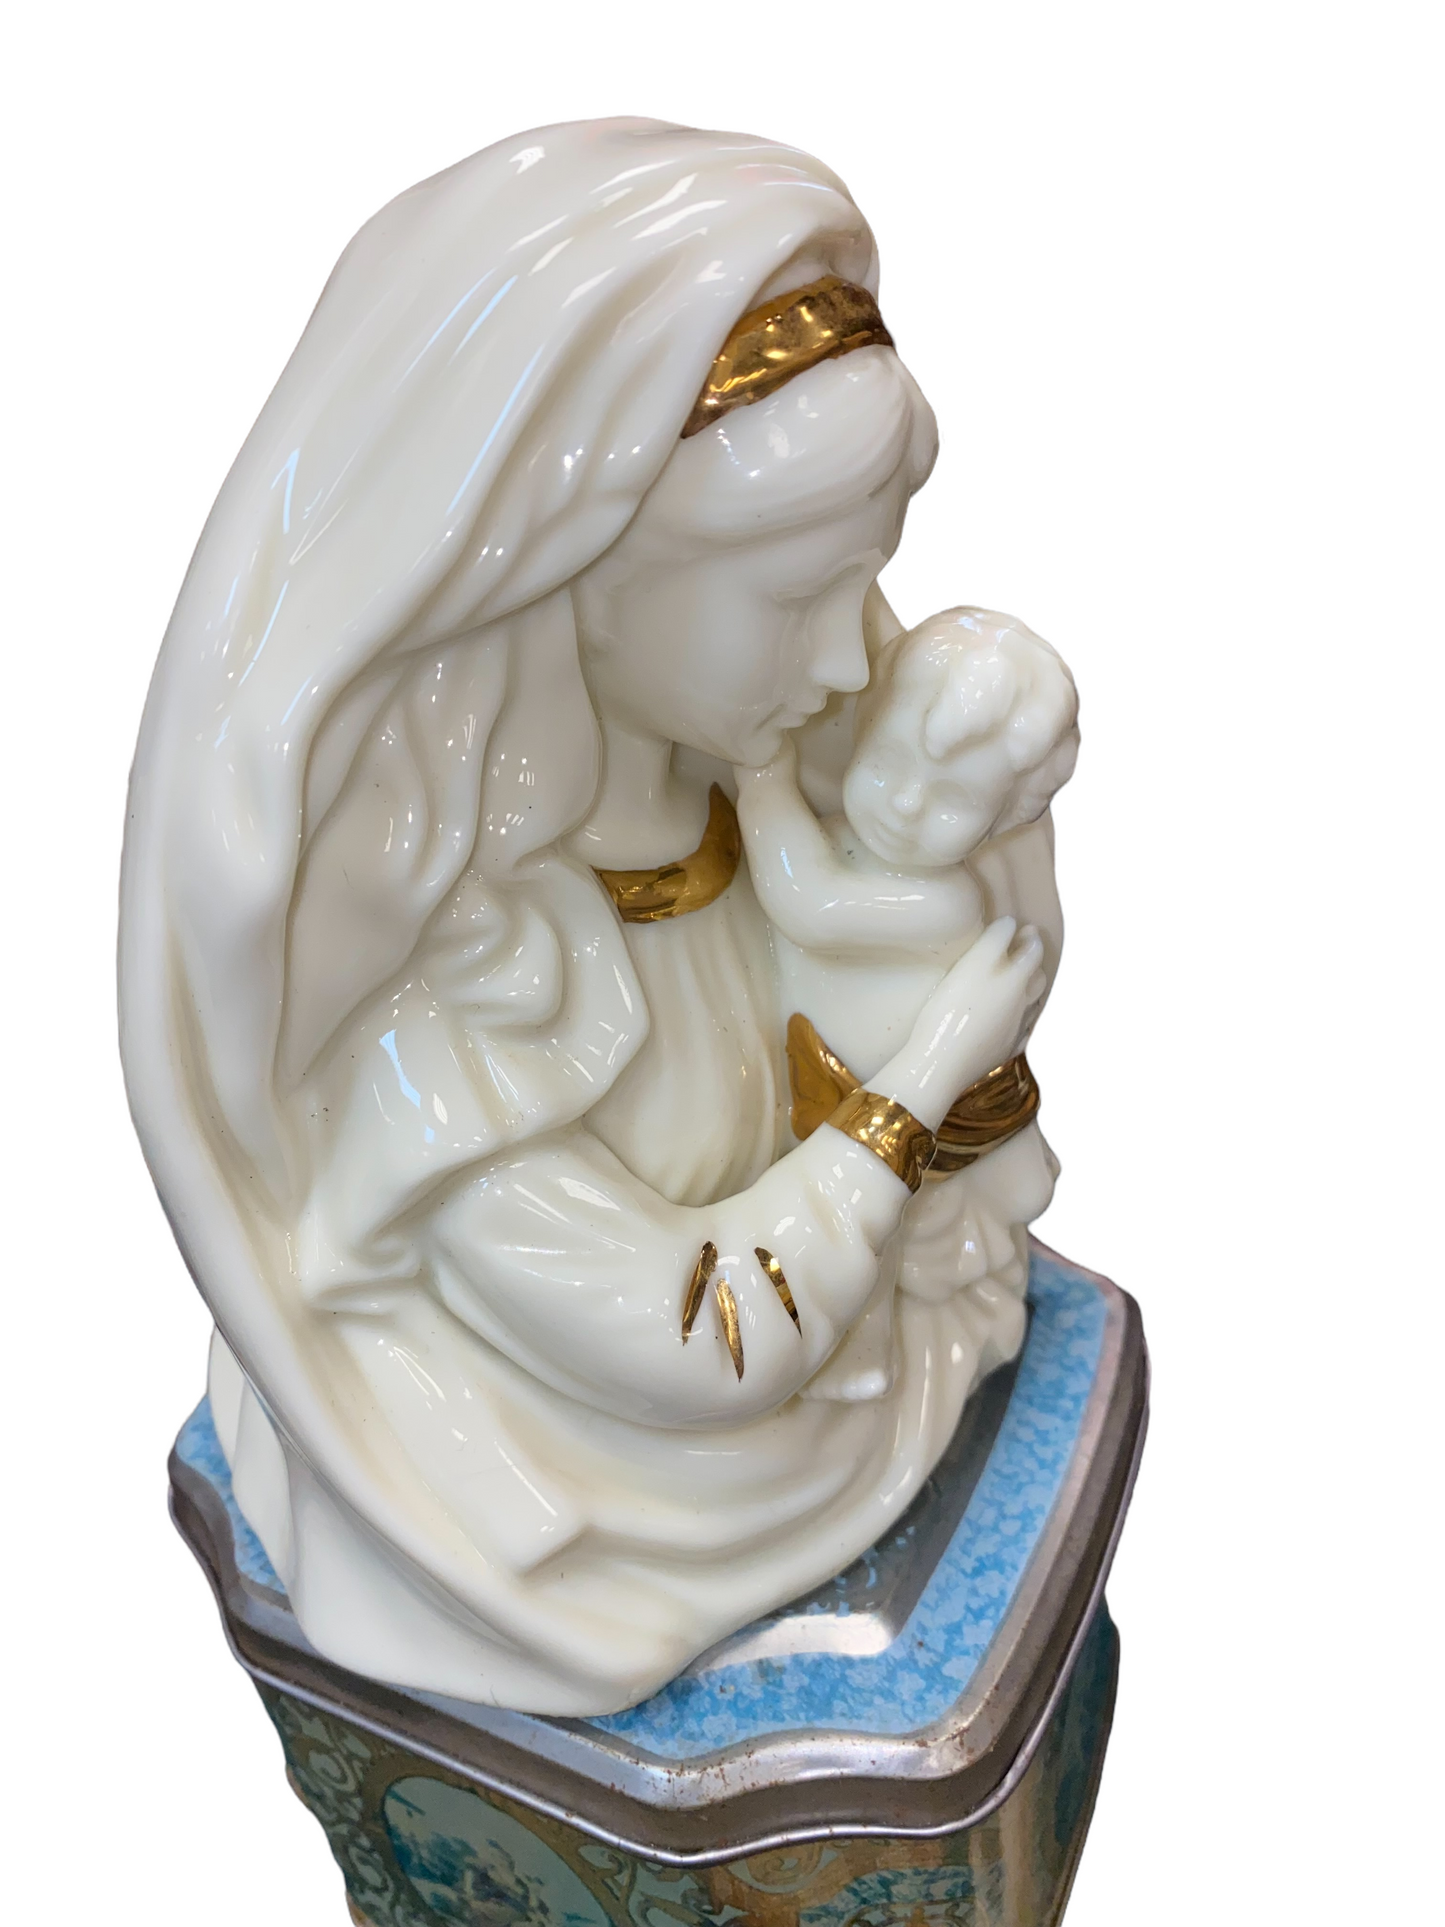 Vintage Lefton Porcelain Mary & Baby Jesus Musical Figurine w/ Gold Accents